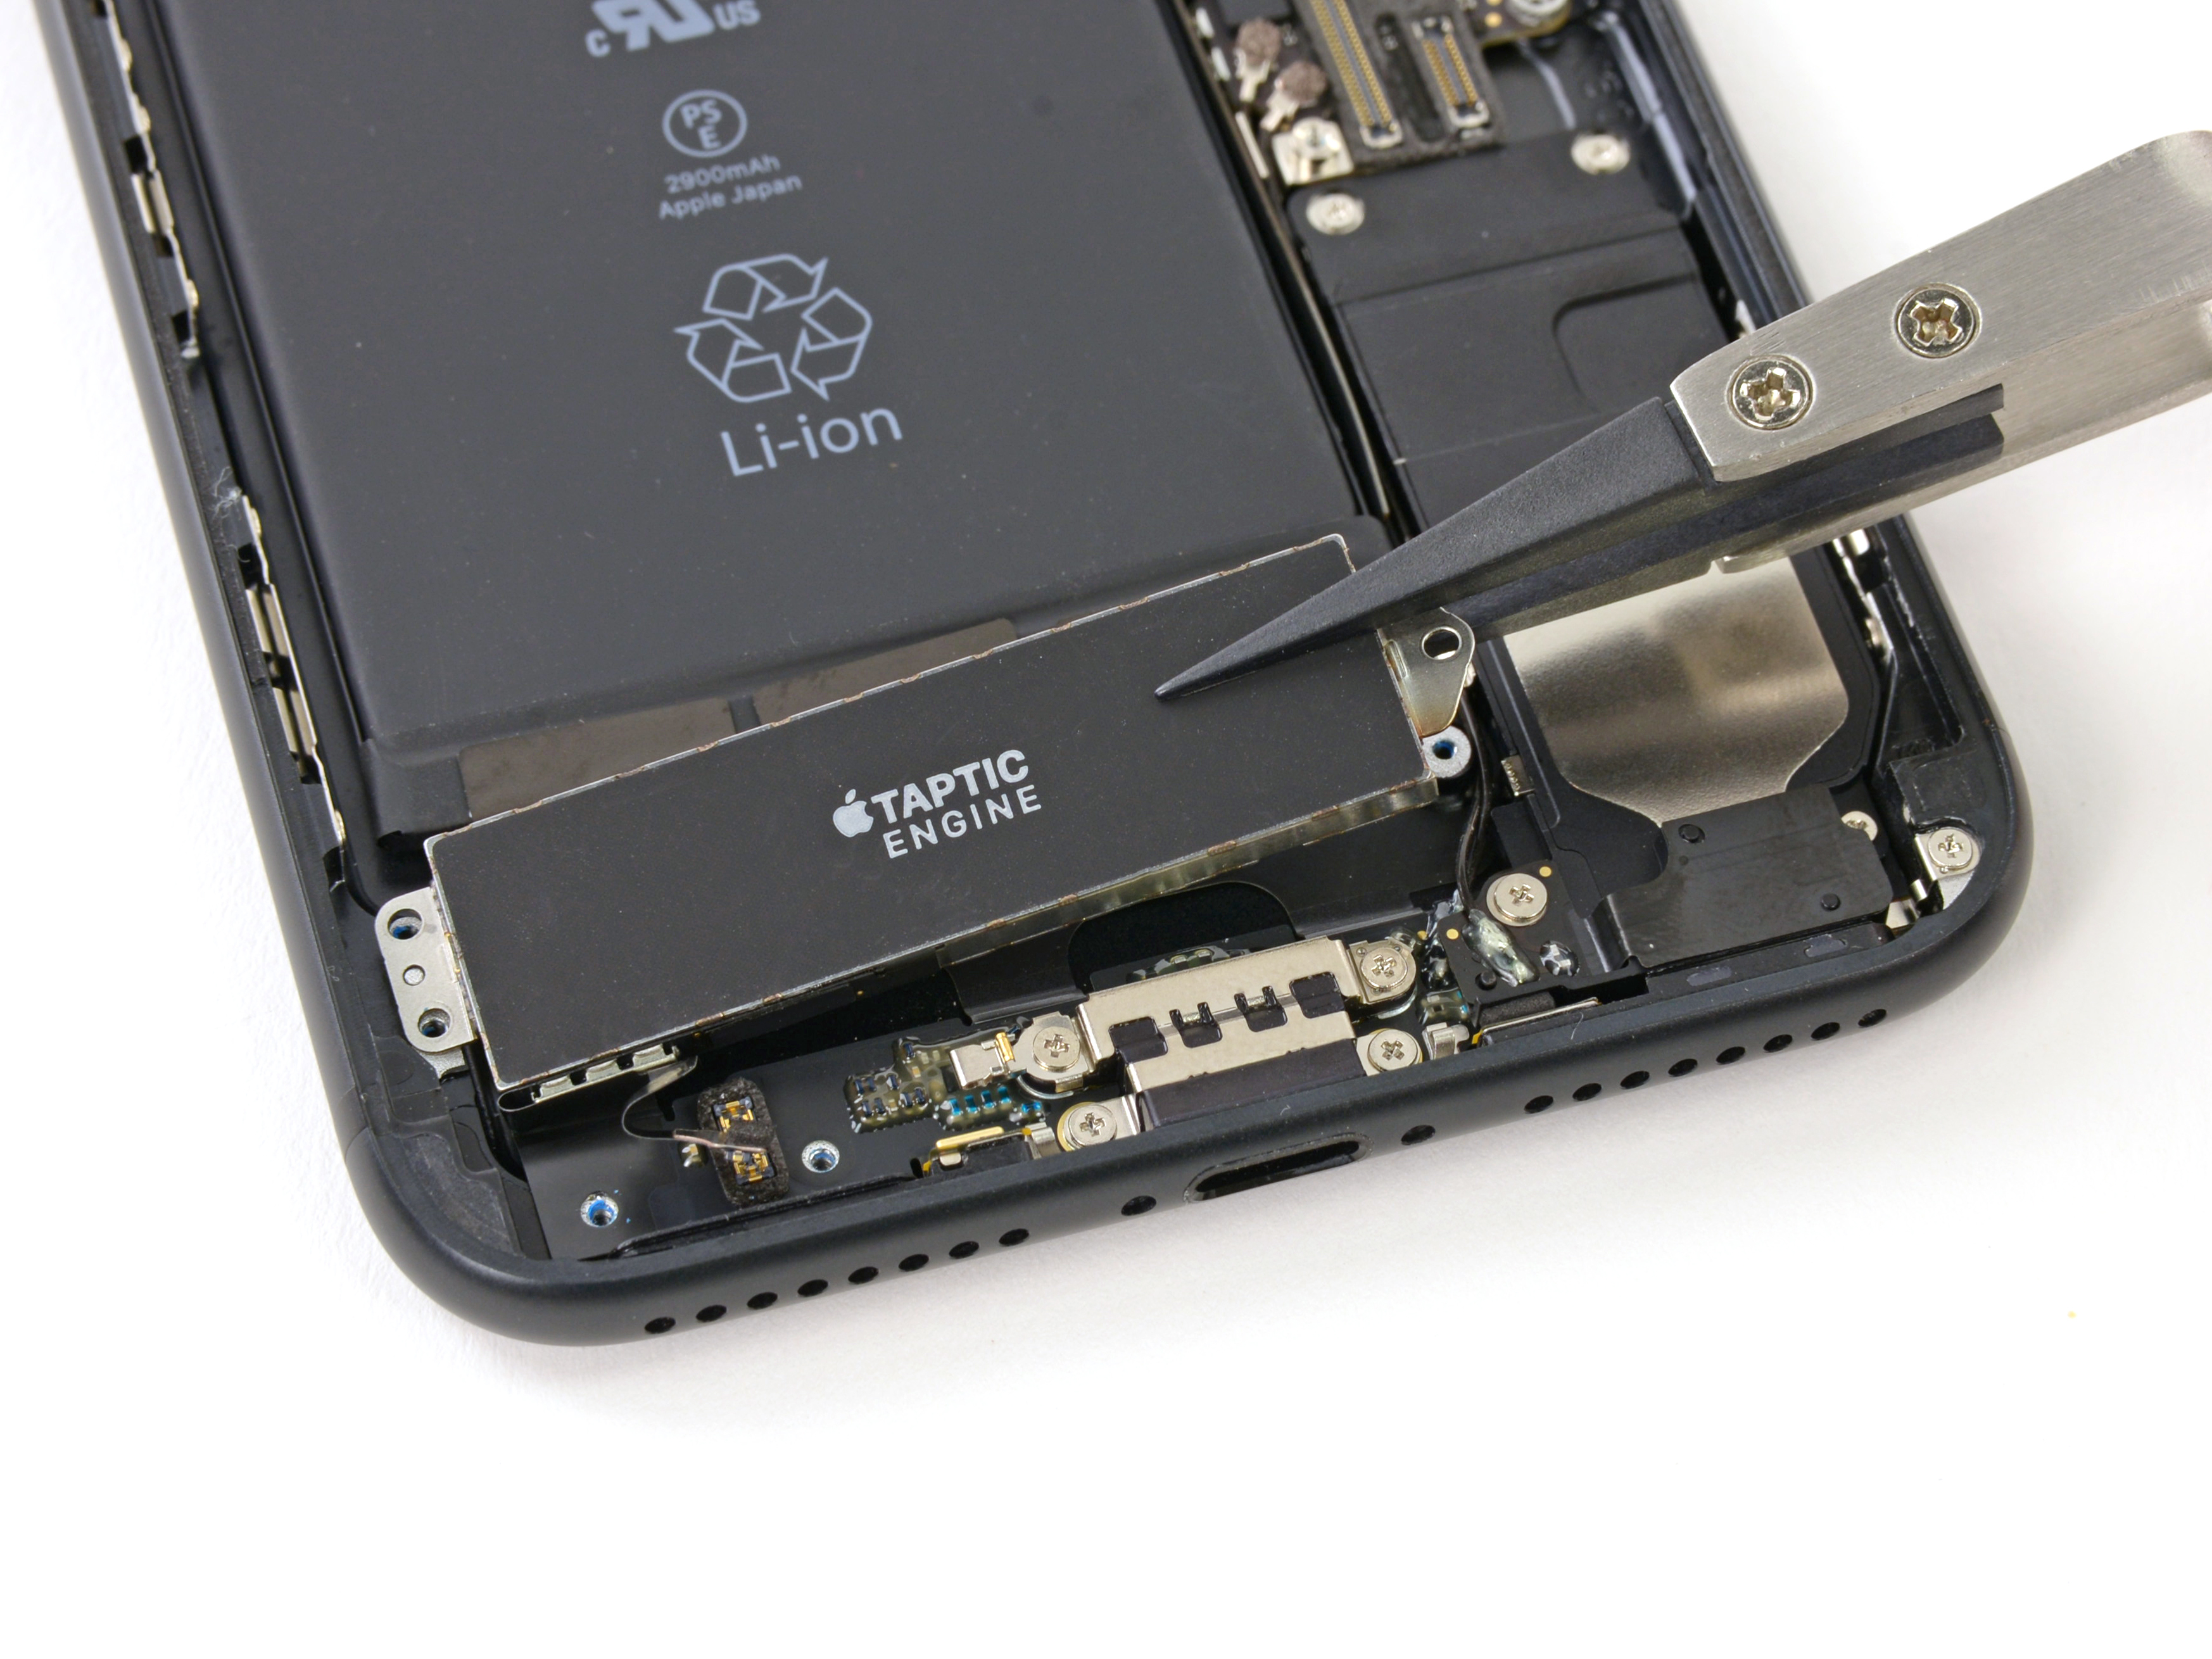 iphone 3 battery replacement instructions